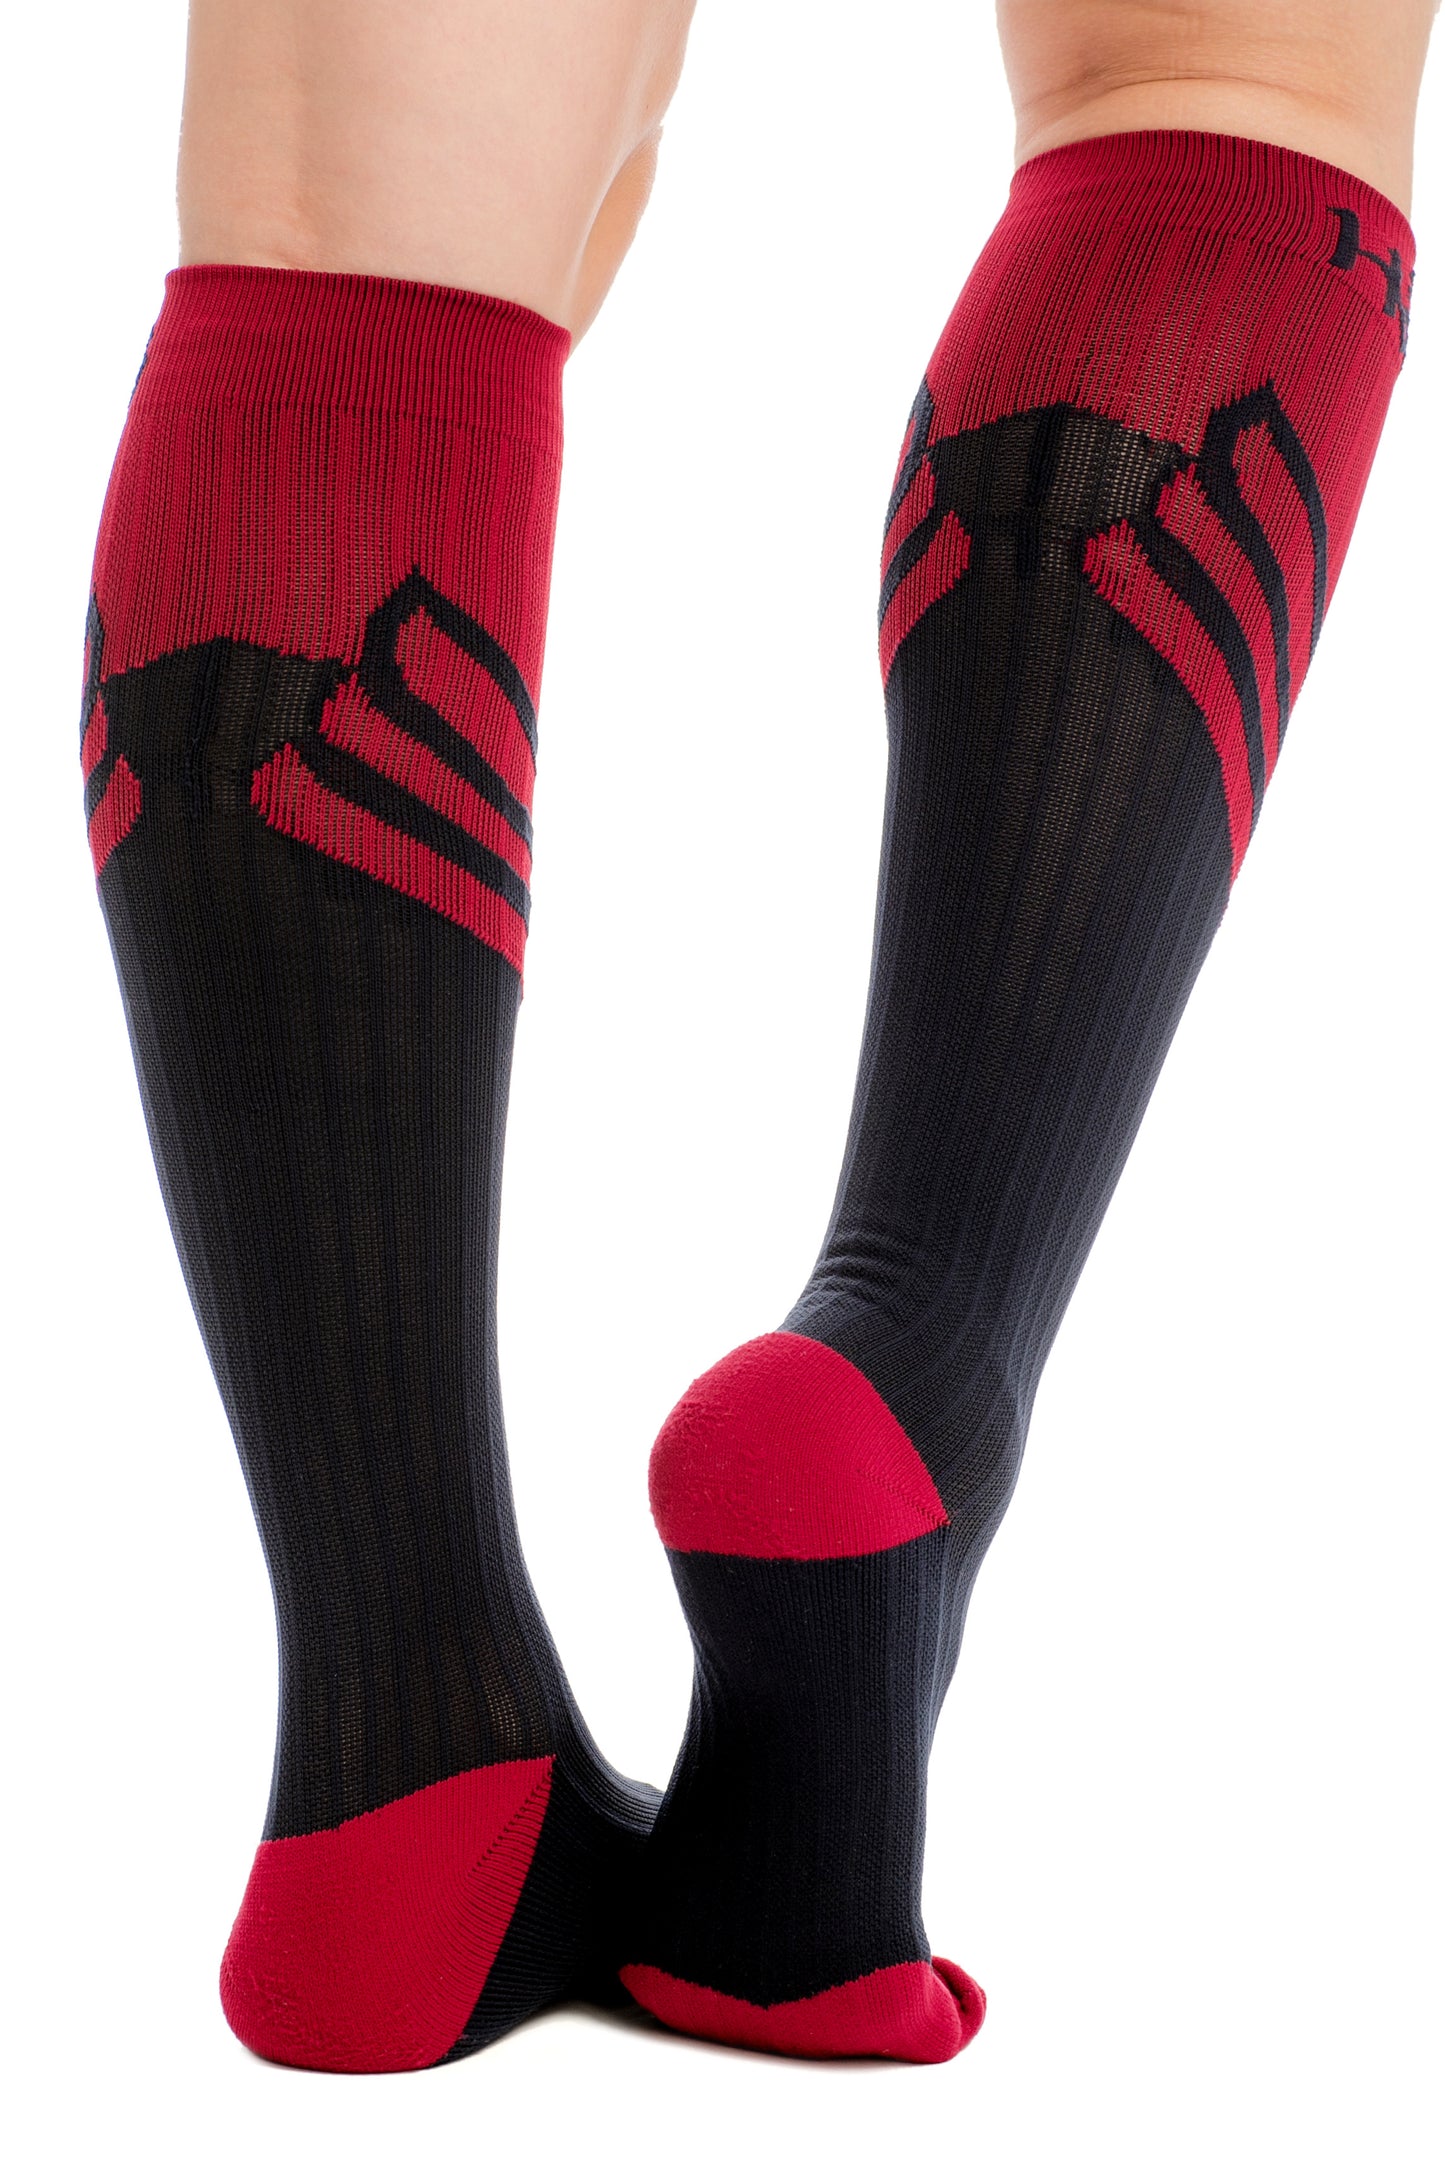 Sport Compression Socks- Navy and Spice